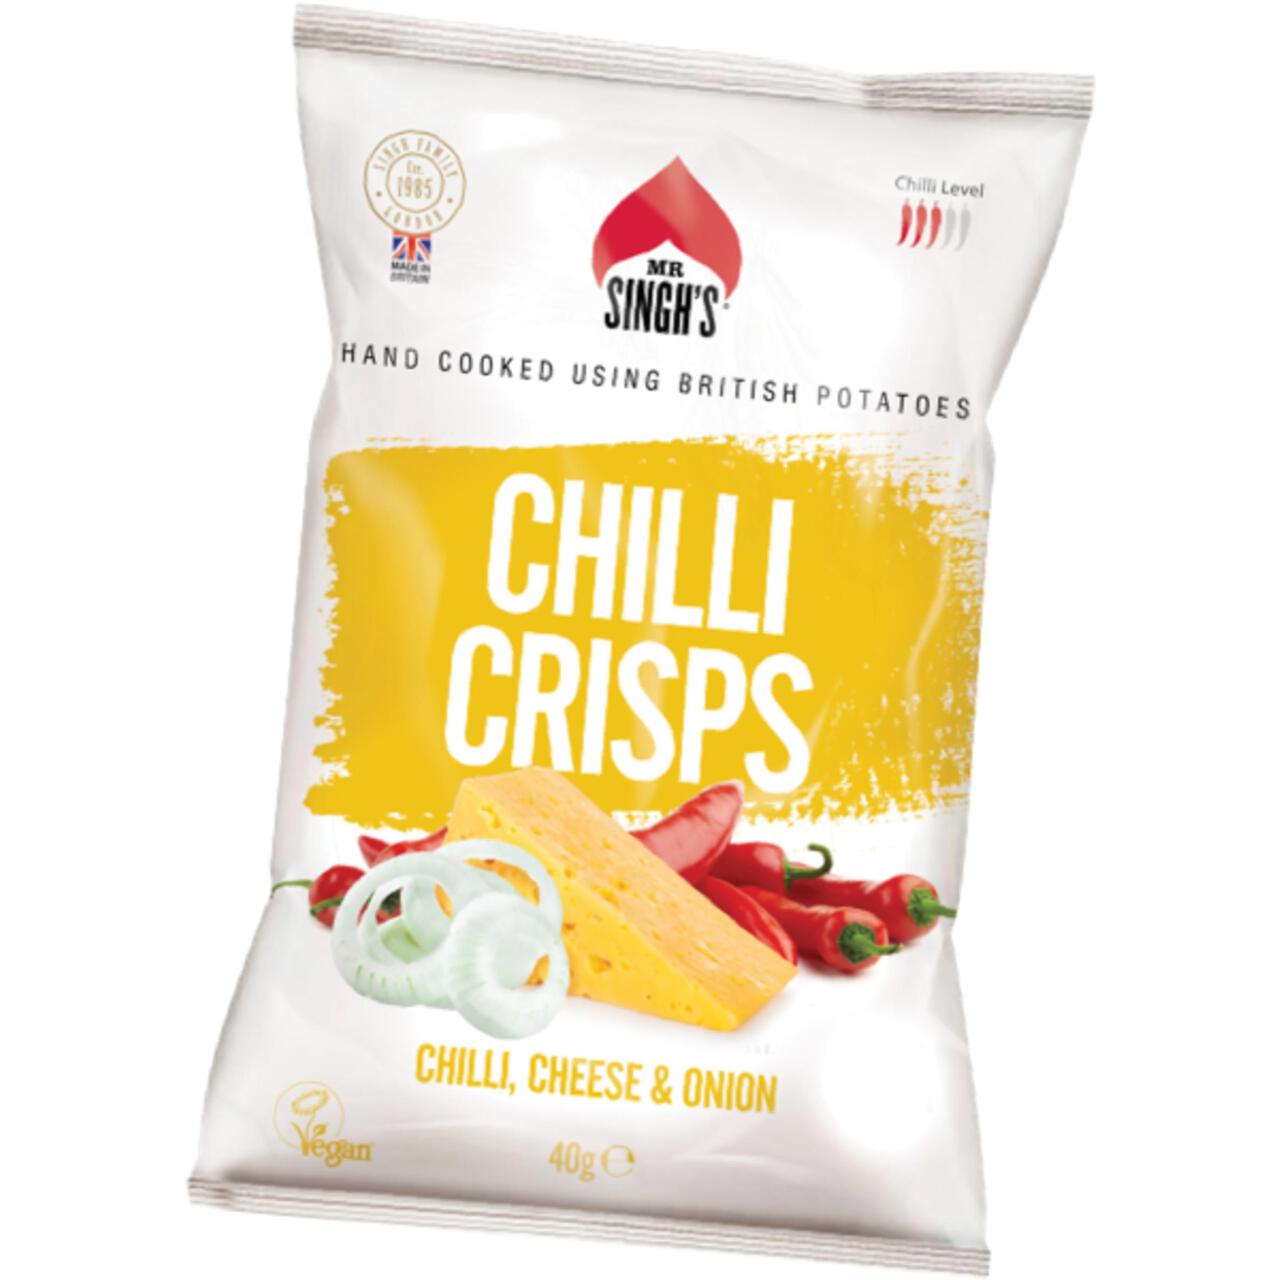 Mr. Singh's Hand Cooked Chilli Cheese & Onion Luxury Crisps 40g